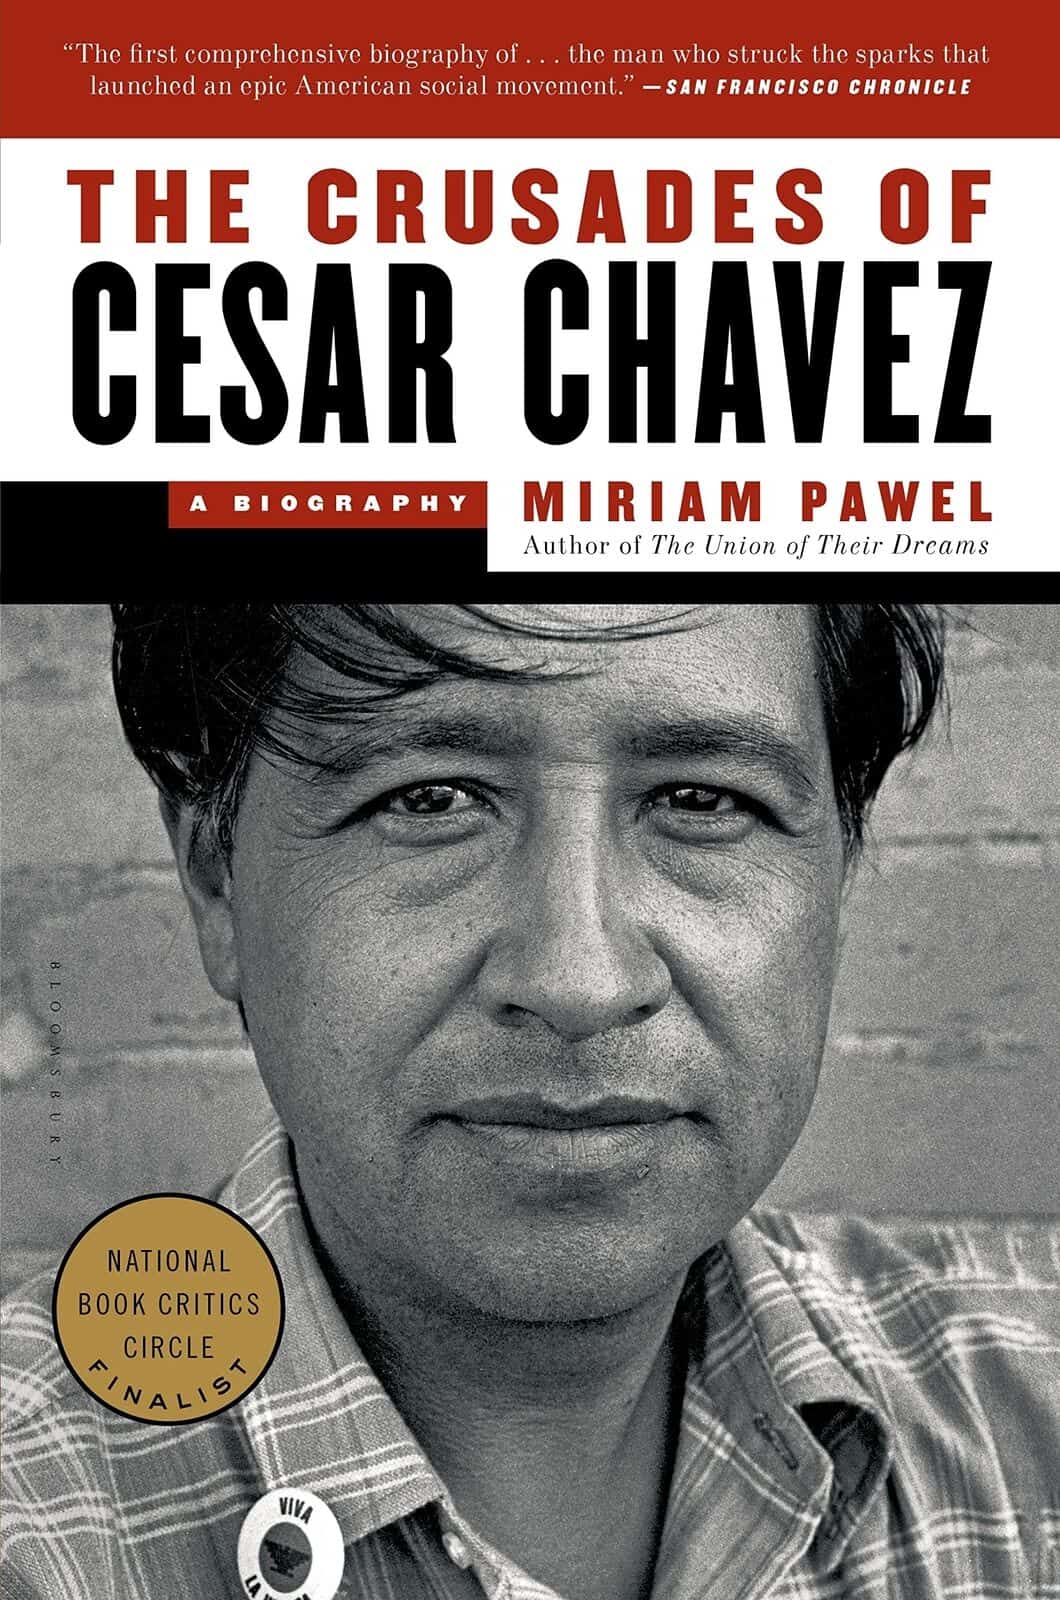 The Crusades of Cesar Chavez – A Biography by Miriam Pawel